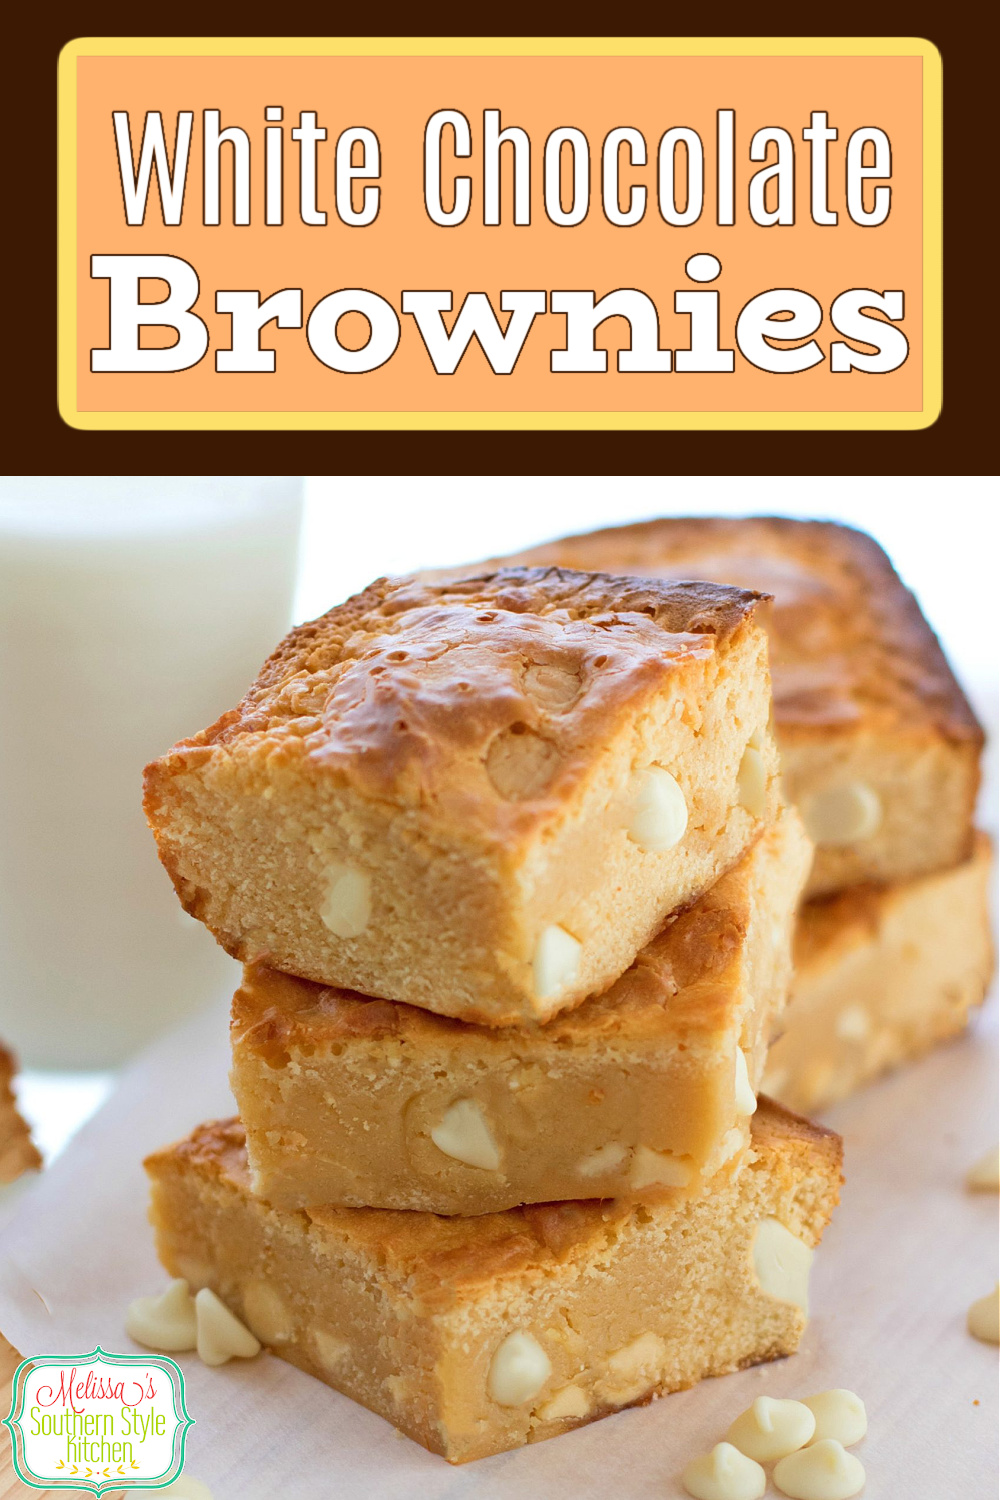 These White Chocolate Brownies are buttery and rich, the perfect handheld sweet snack #brownies #whitechocolatebrownies #brownierecipes #whitechocolate #chocolate #desserts #dessertfoodrecipes #southernfood #southernrecipes #sweets #holidaybaking #holidayrecipes via @melissasssk